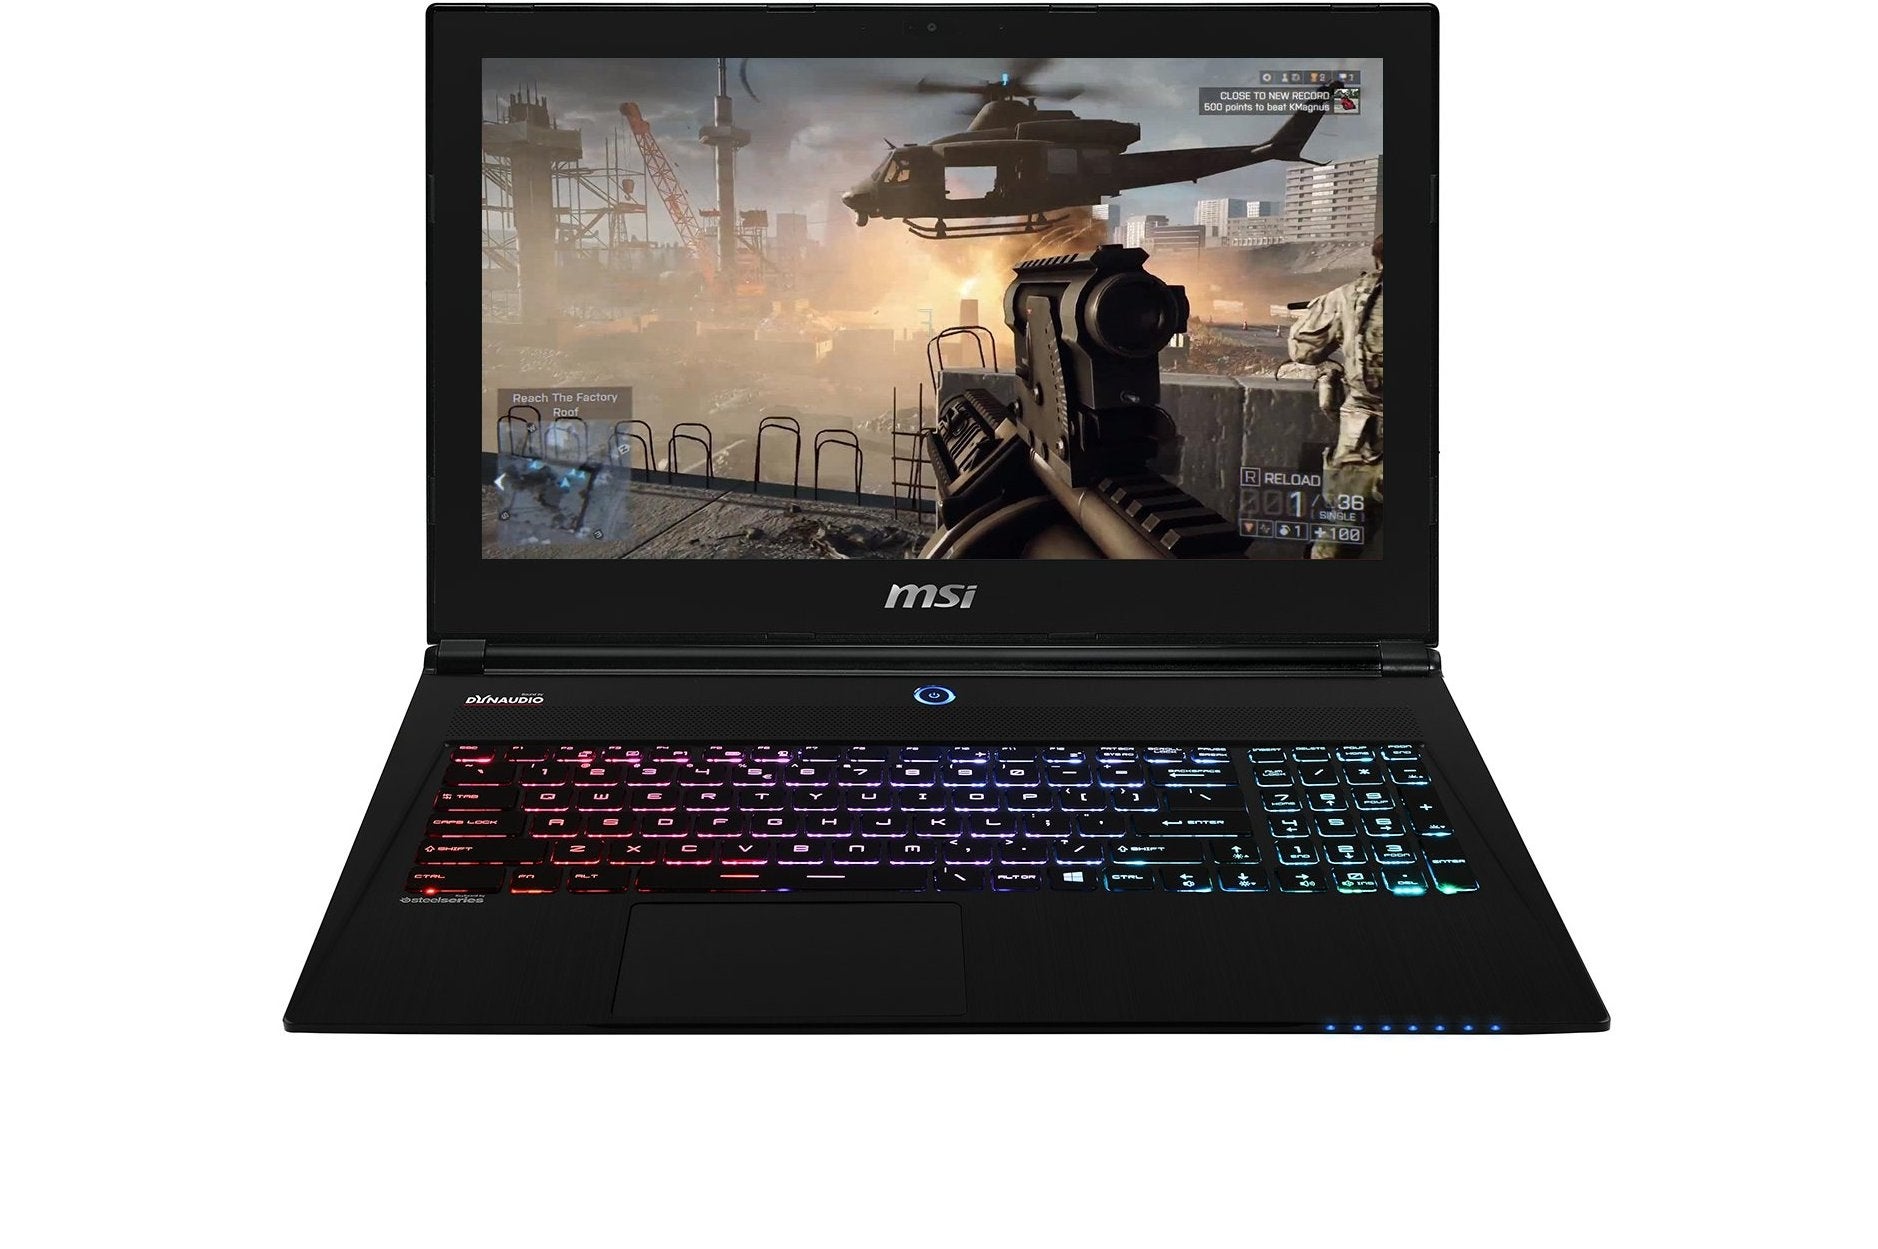 MSI GS60 2PC Ghost with Nvidia GTX 860M review | Eurogamer.net